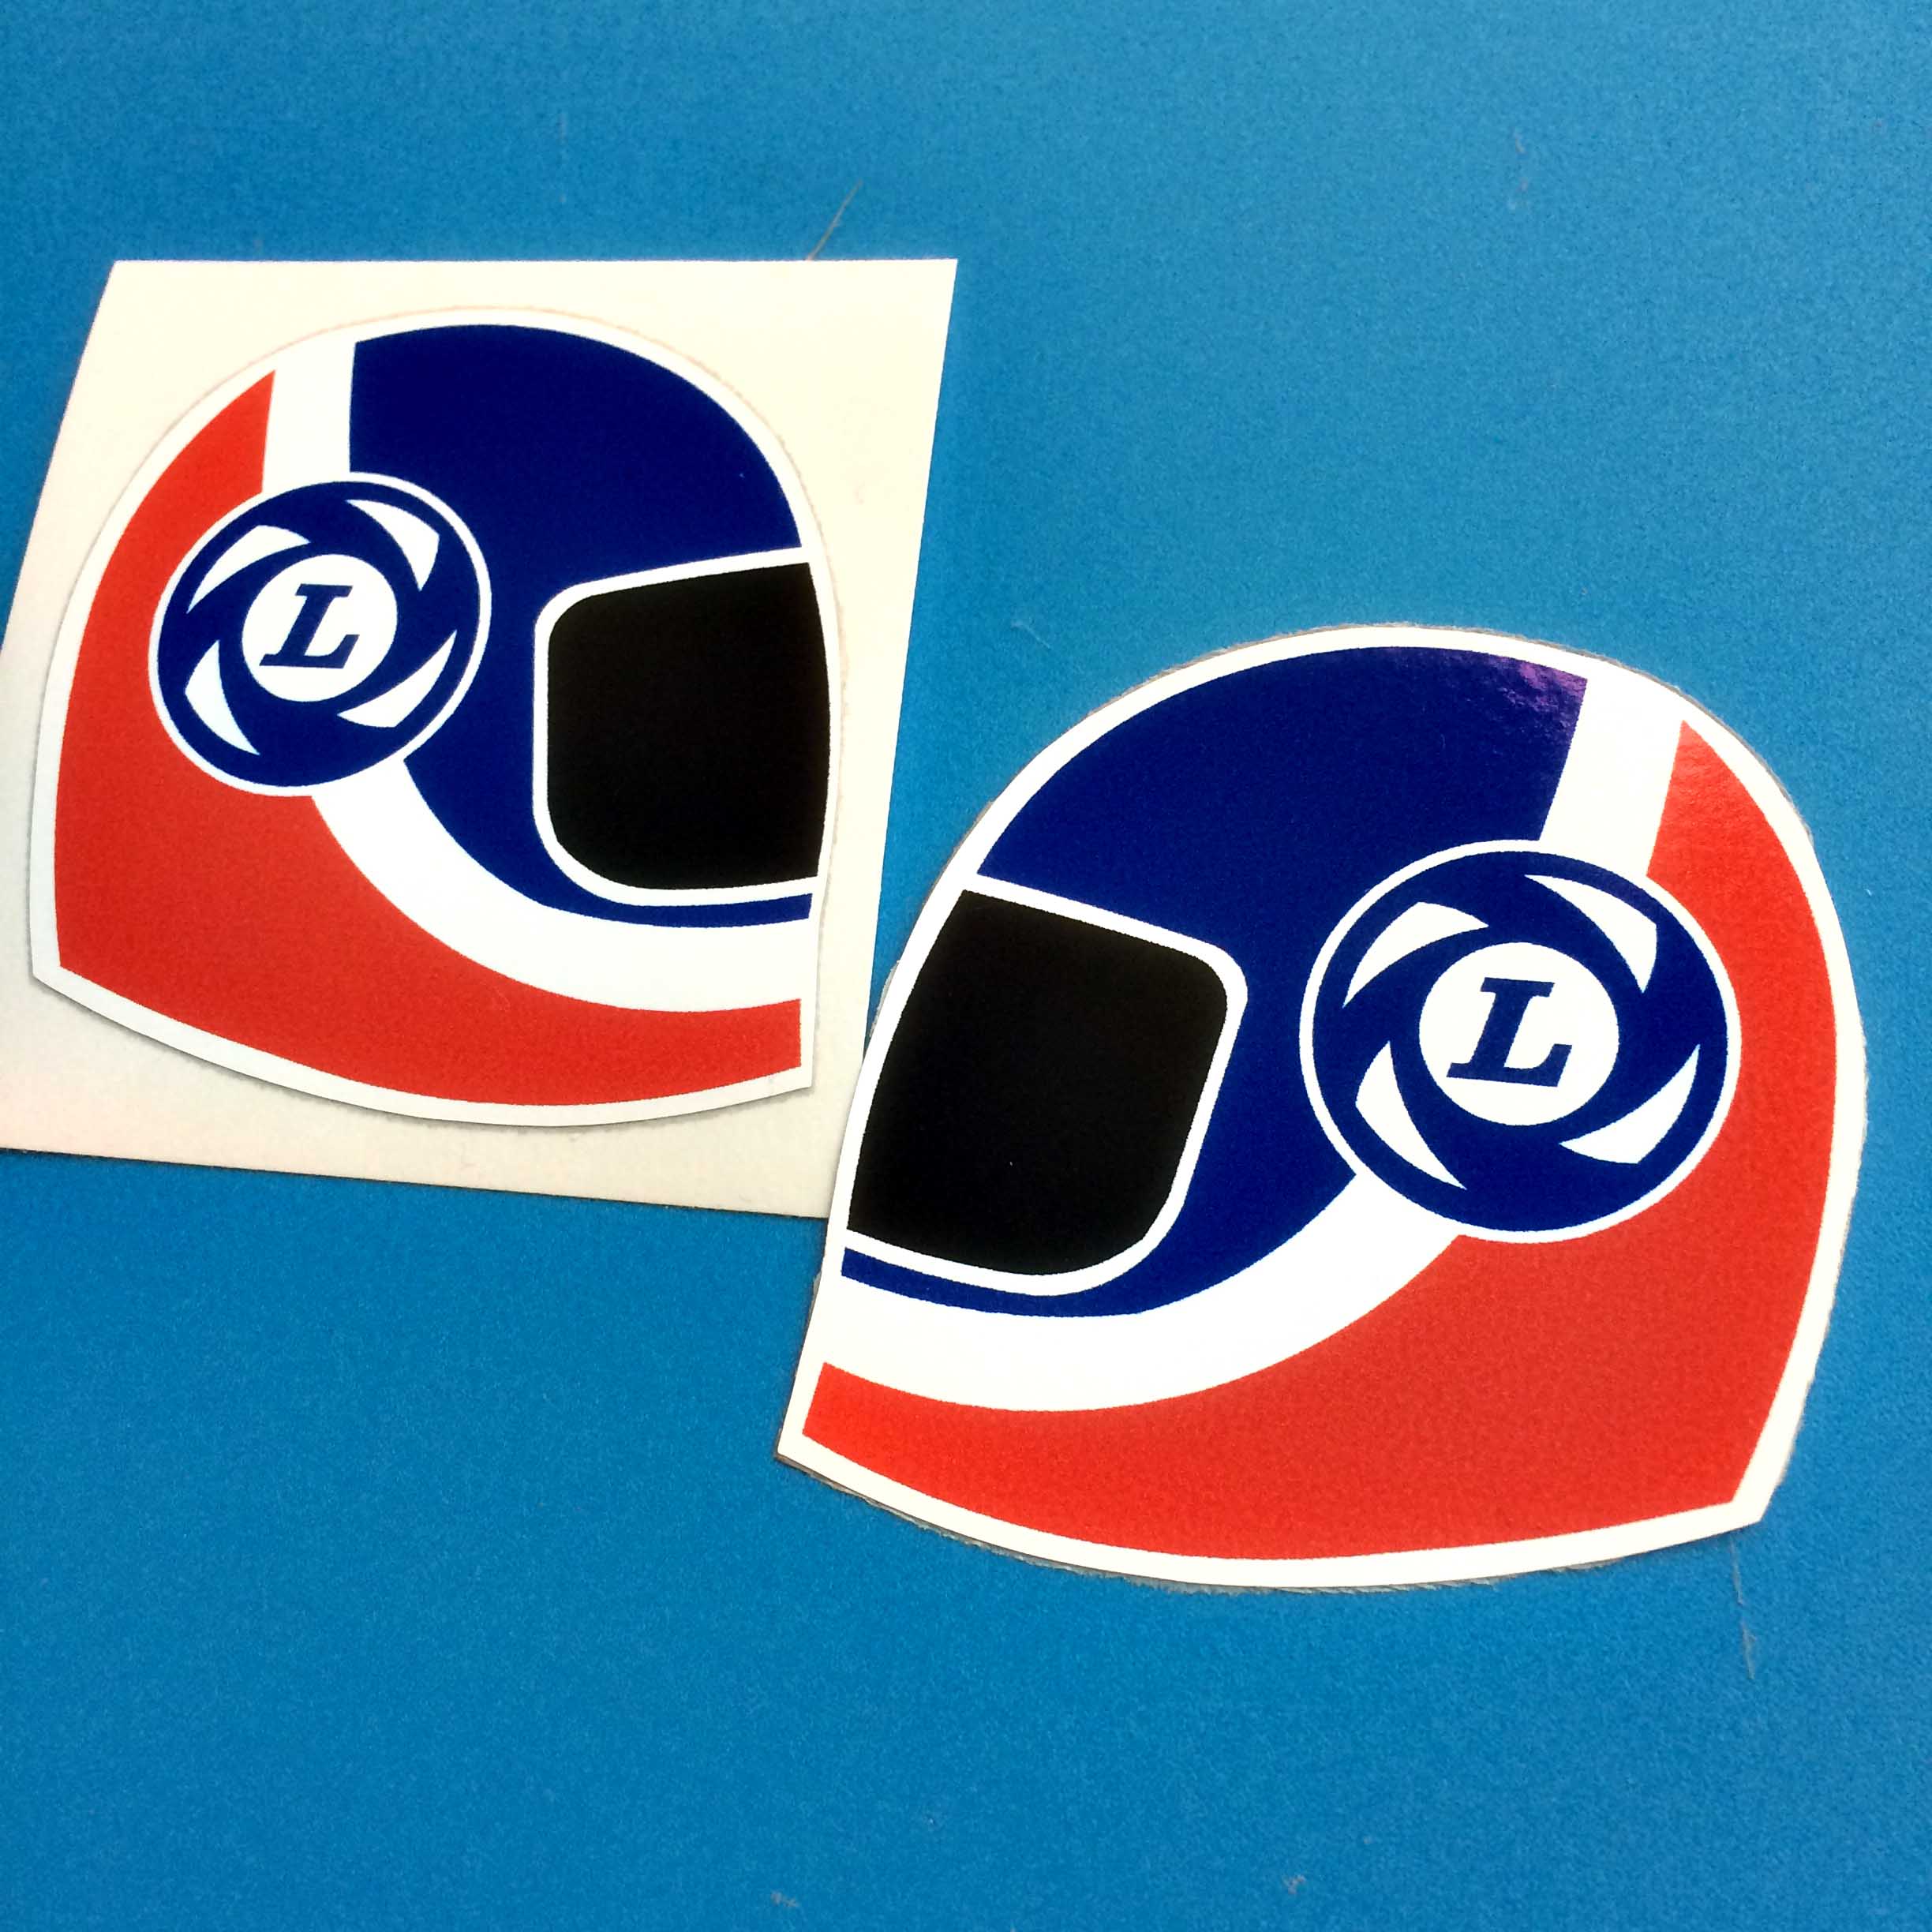 BRITISH LEYLAND HELMET STICKERS. Red, white and blue motorbike helmet. British Leyland blue and white L logo is next to the visor.